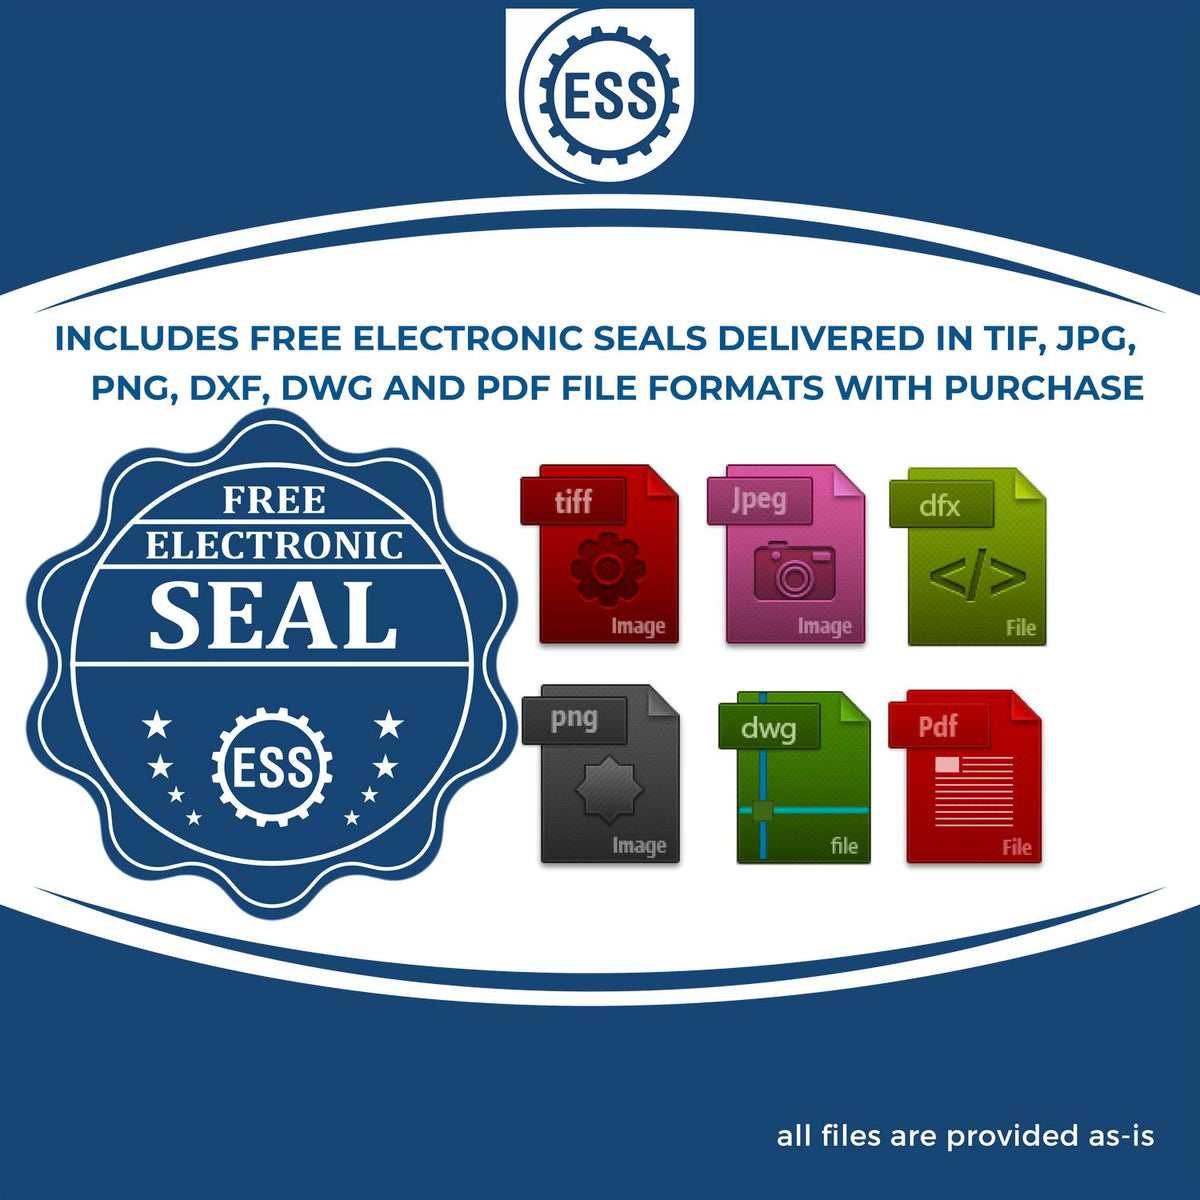 An infographic for the free electronic seal for the State of Tennessee Long Reach Architectural Embossing Seal illustrating the different file type icons such as DXF, DWG, TIF, JPG and PNG.